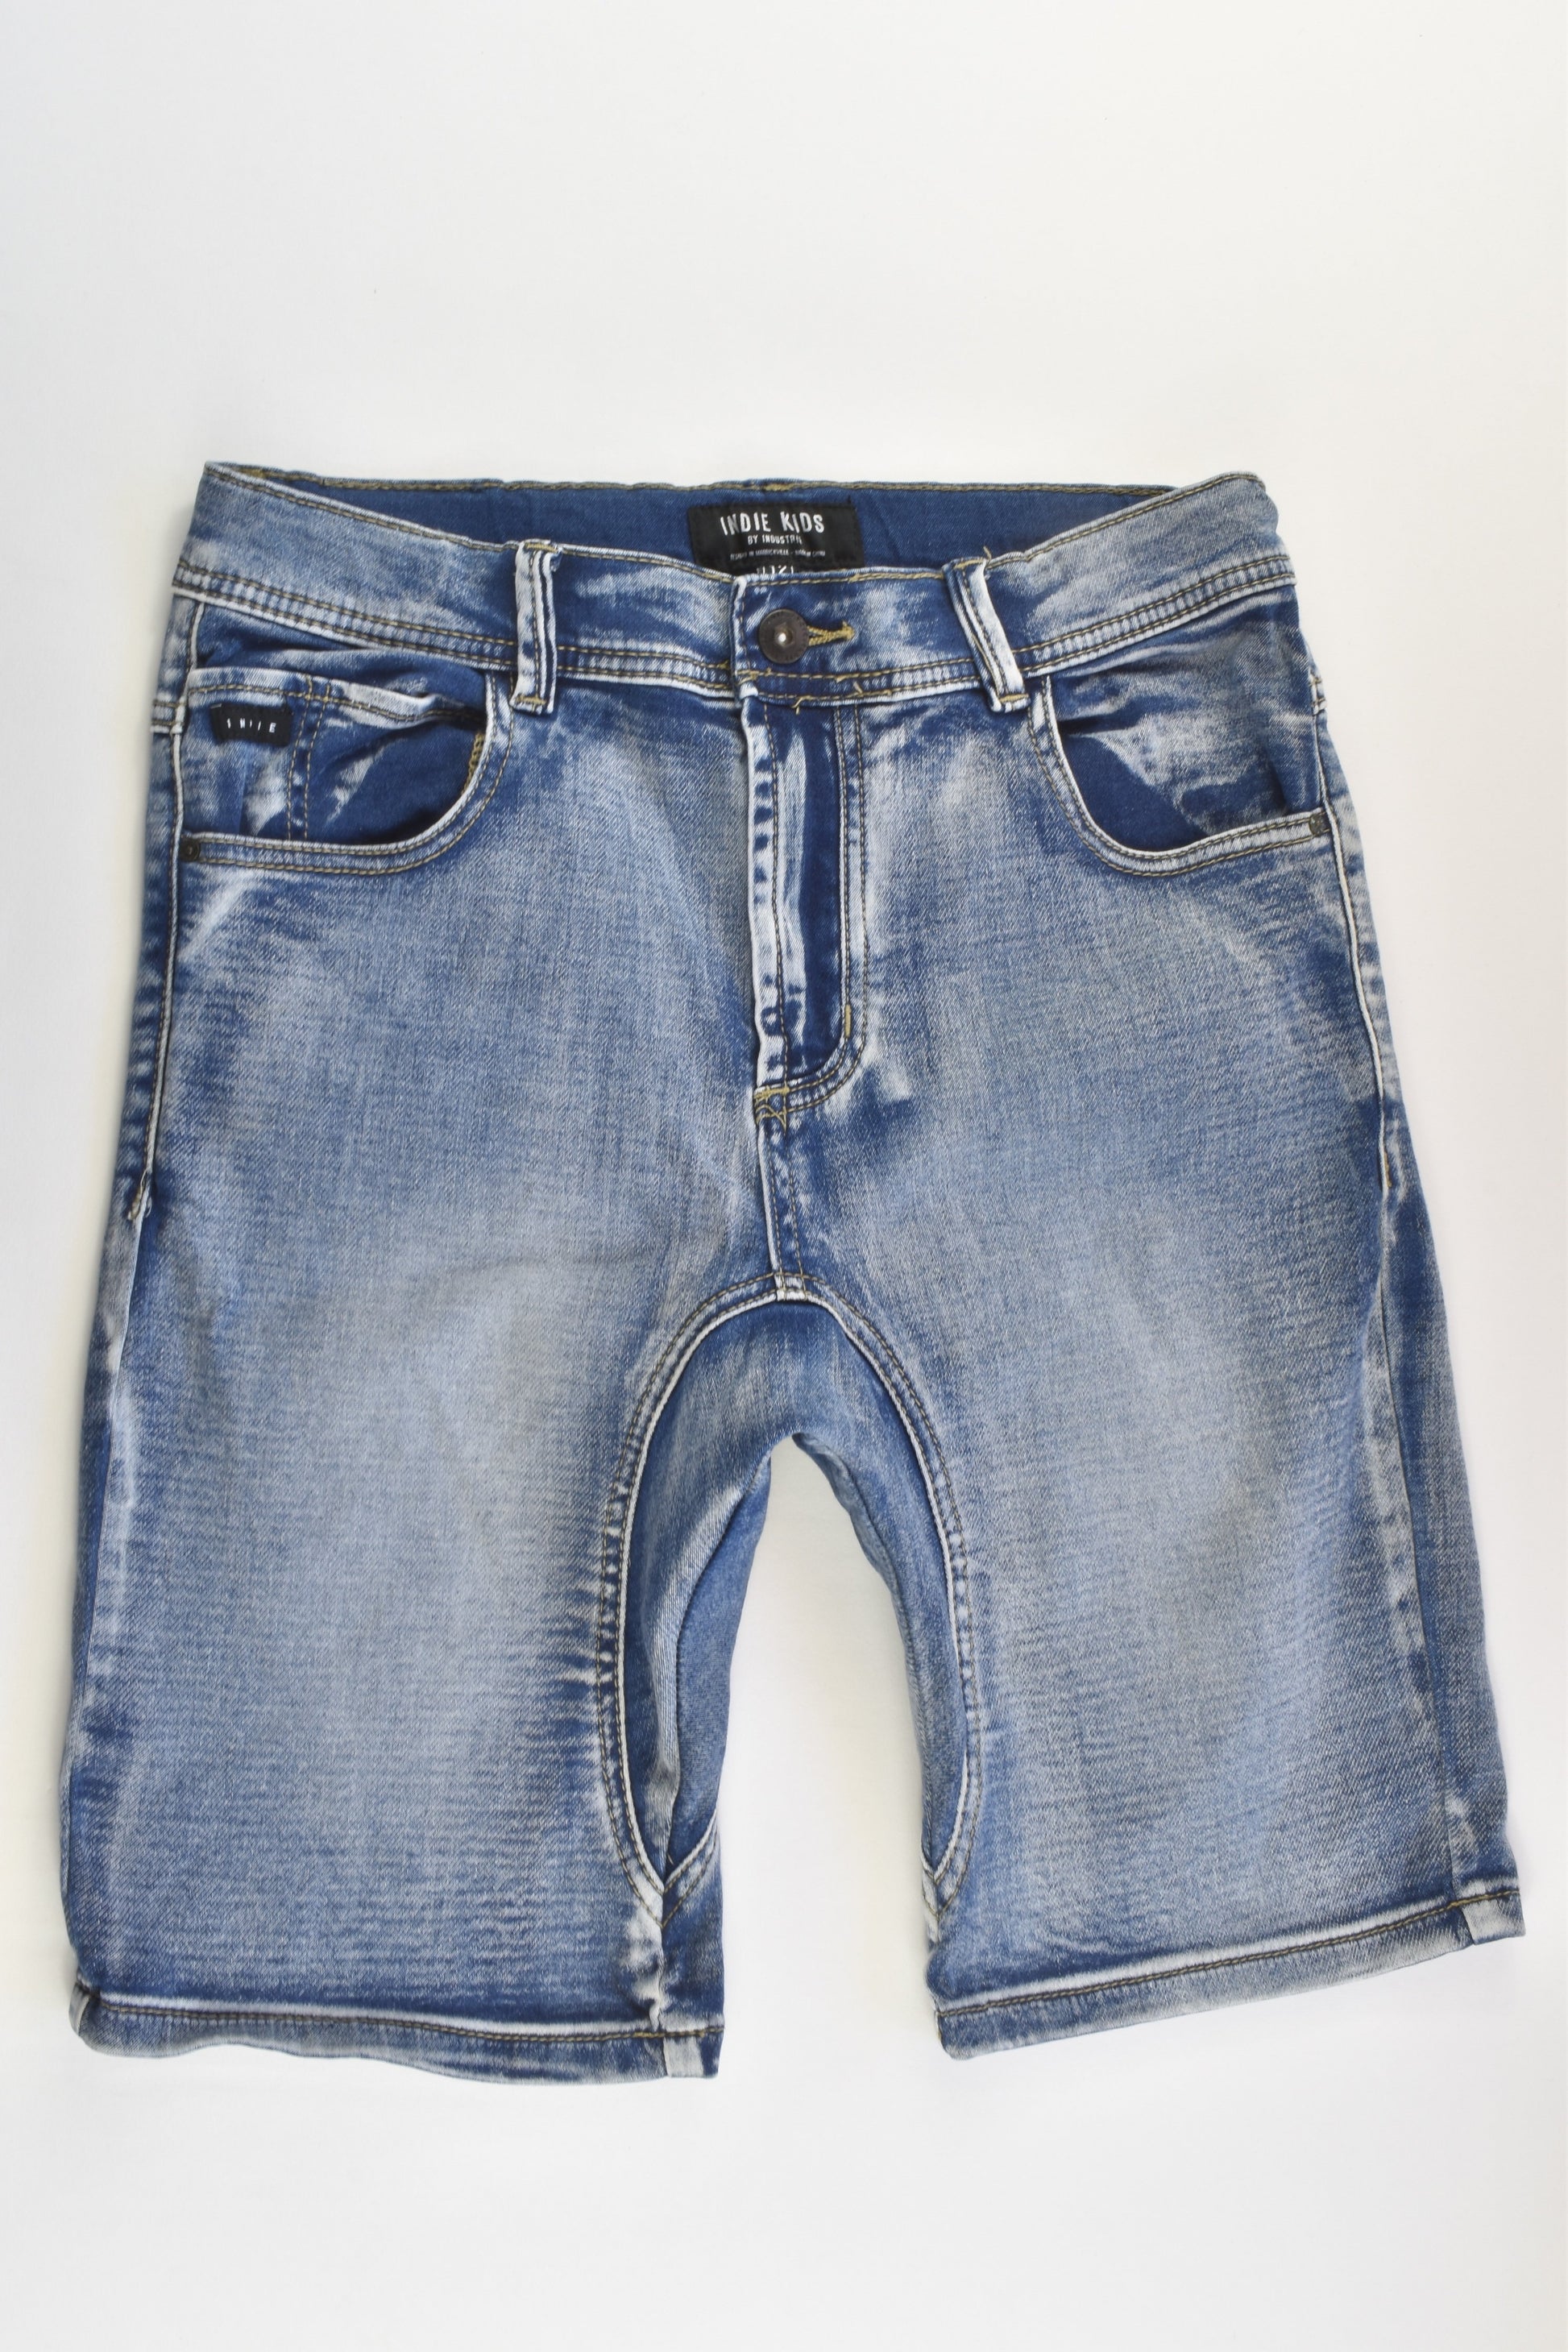 Indie Kids By Industrie Size 12 Stretchy Baggy Denim Shorts